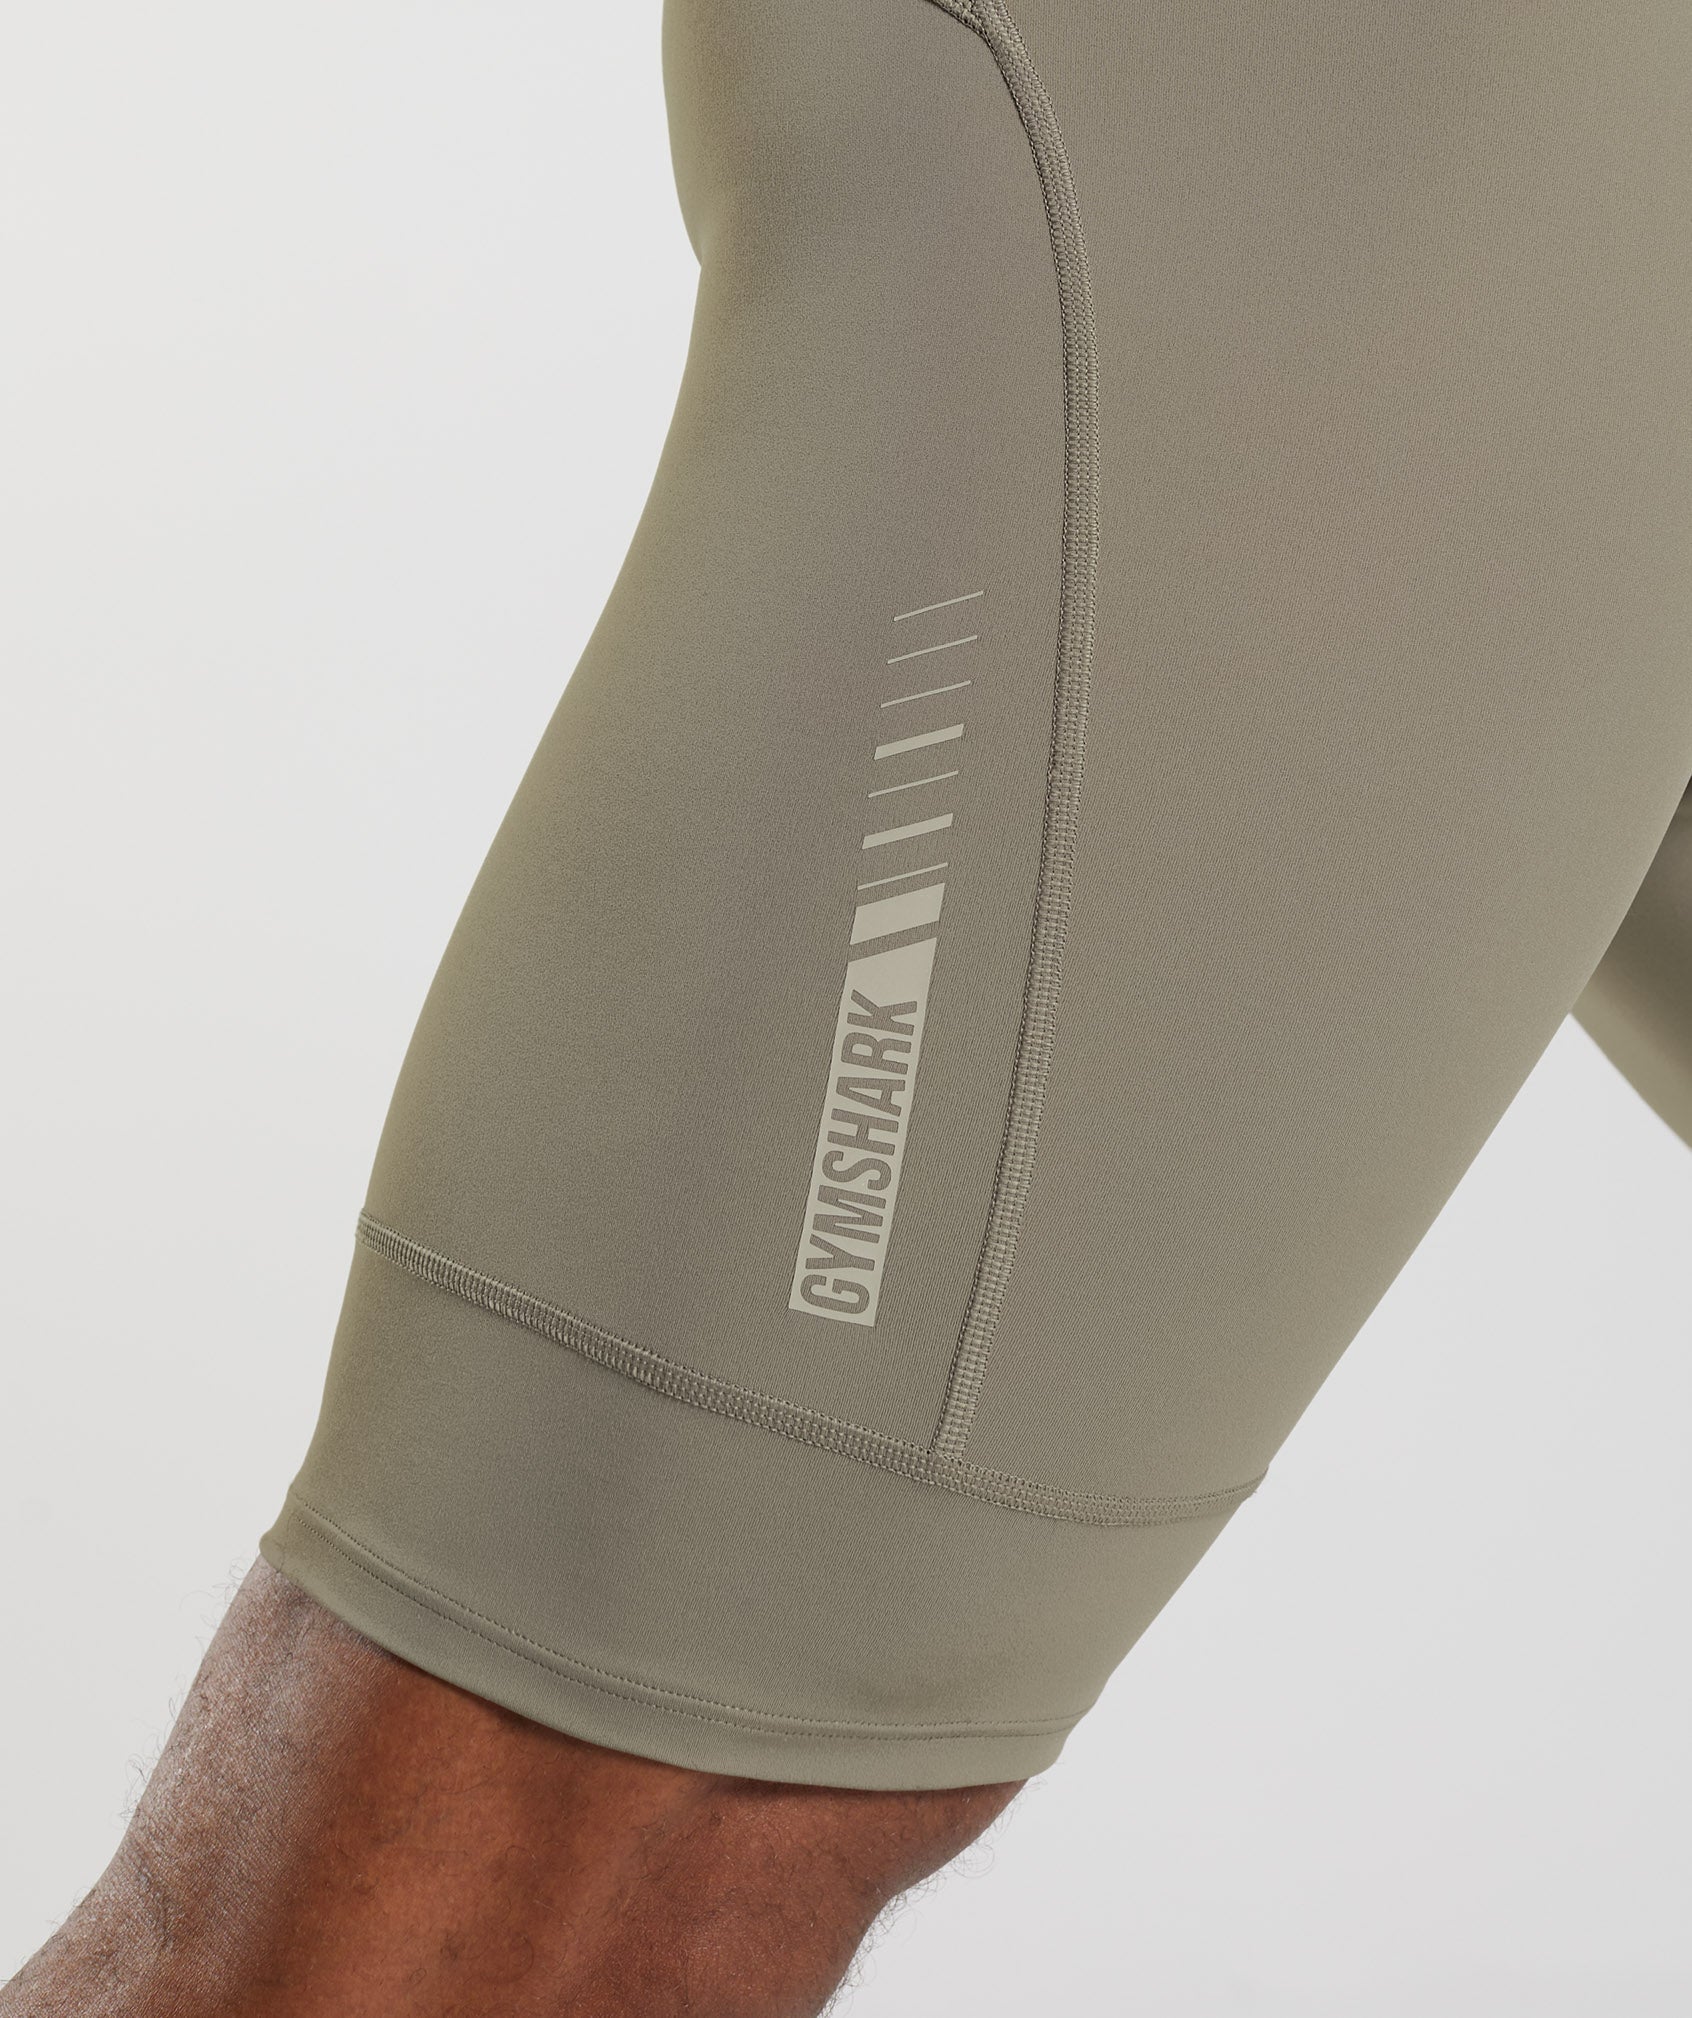 Apex Run 1/2 Tights in Earthy Brown - view 5